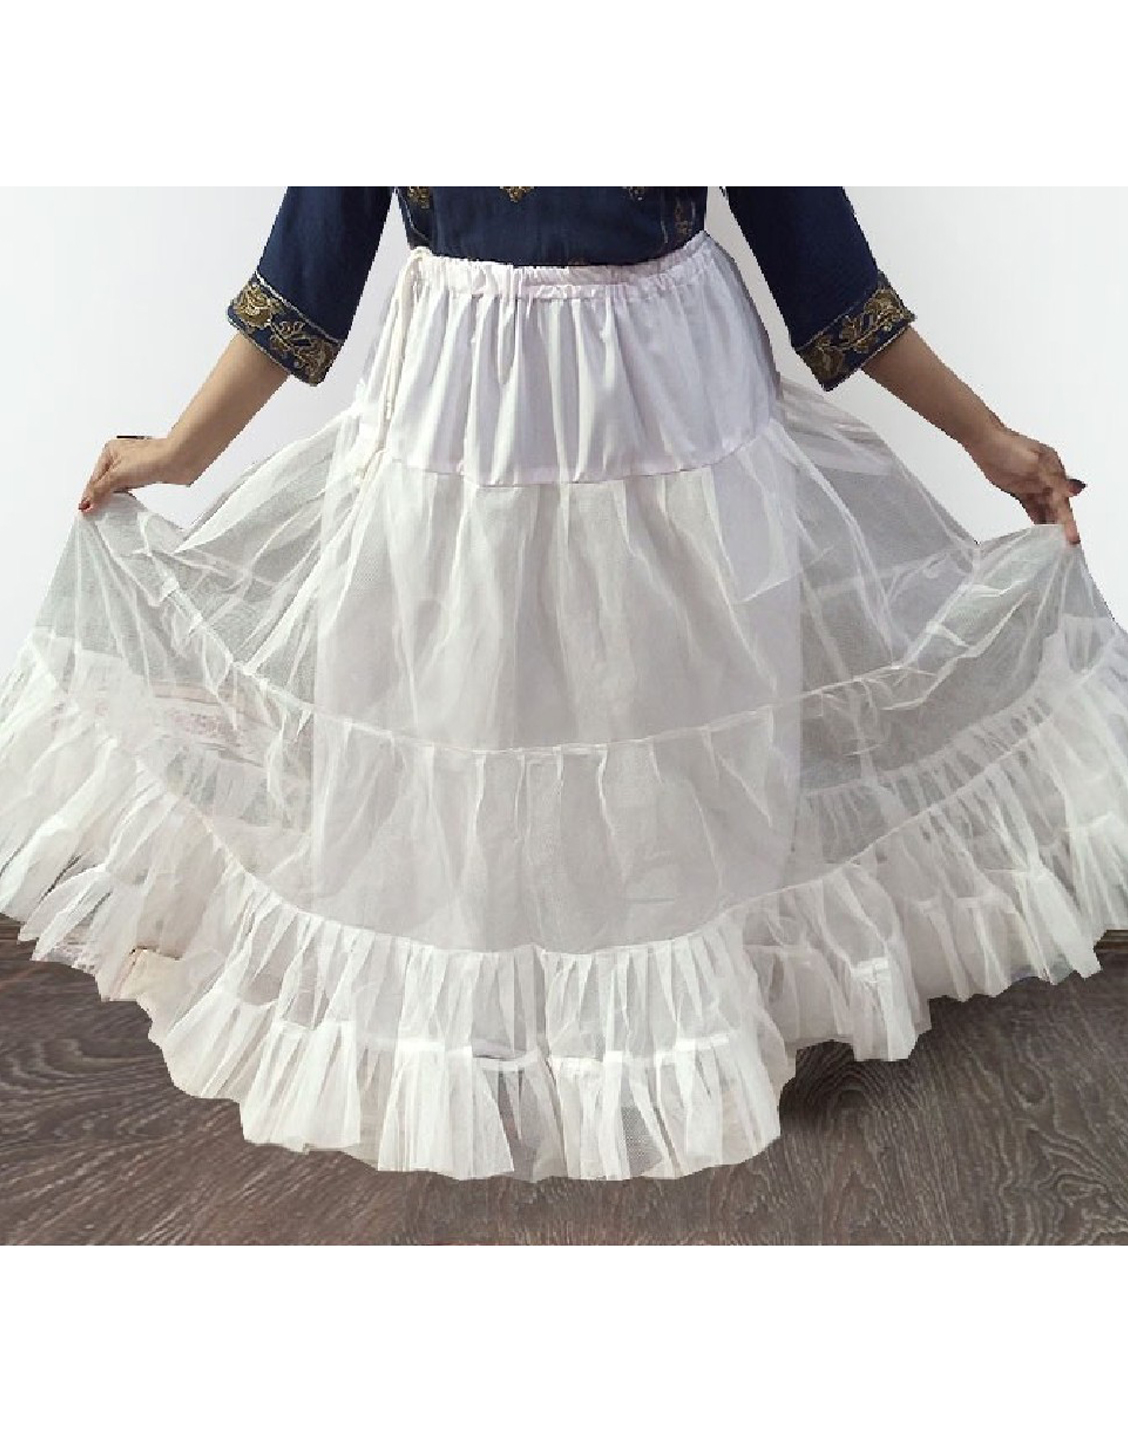 DIY Hack: How To Make A CANCAN SKIRT Within 5 minutes - YouTube